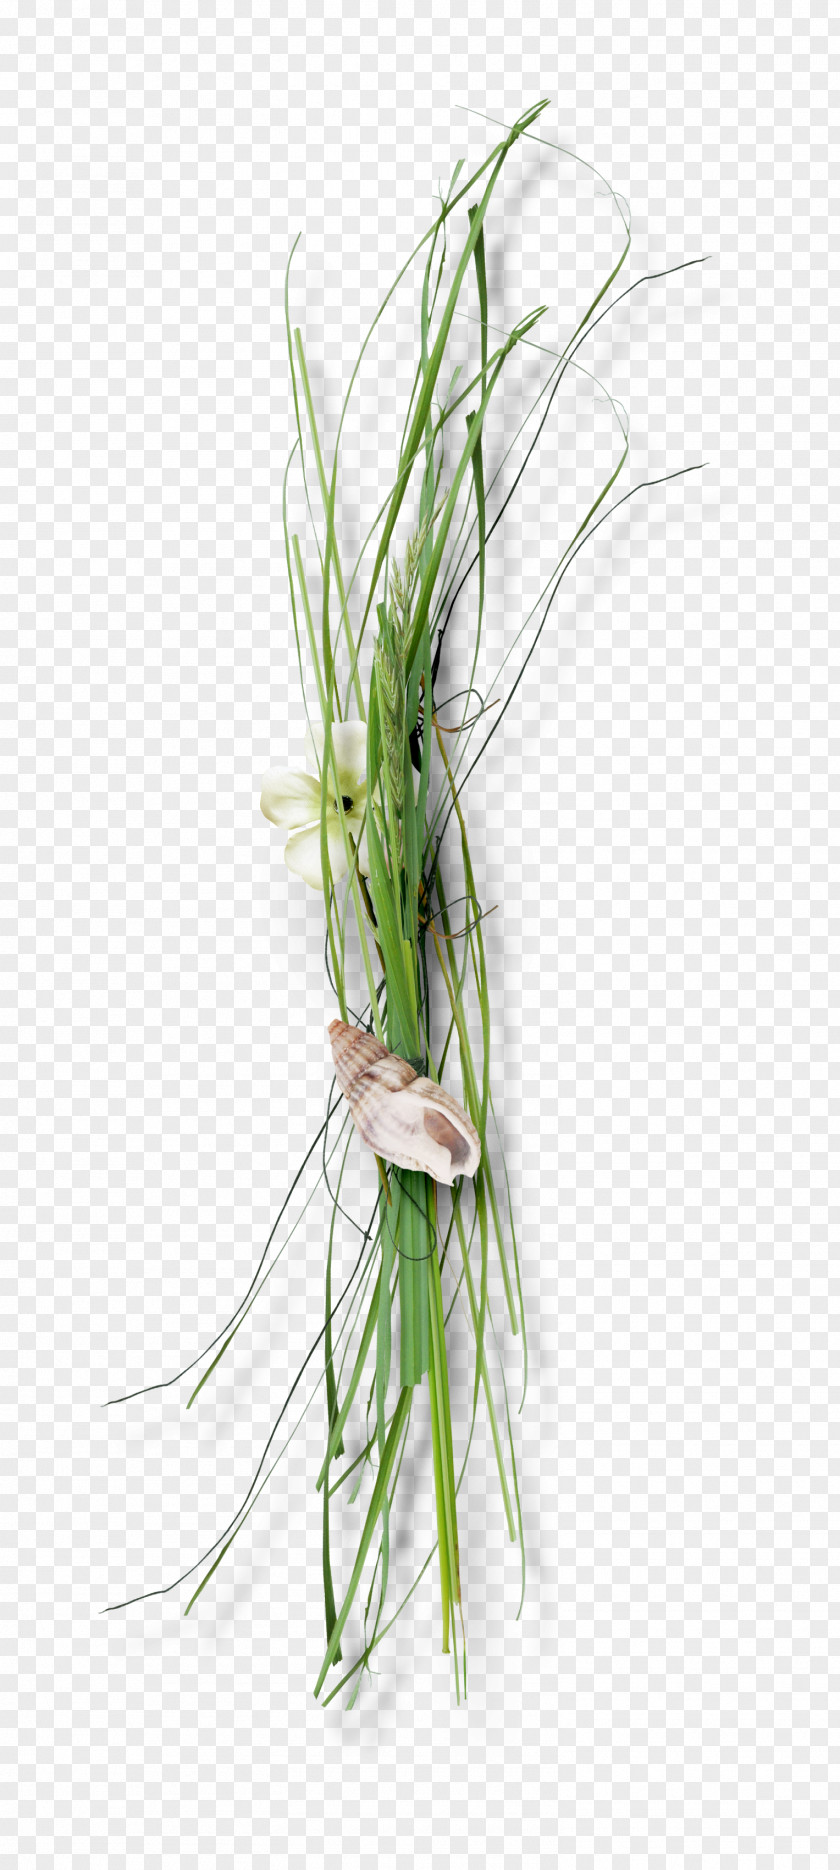 Grass Flowers Conch Download Floral Design PNG